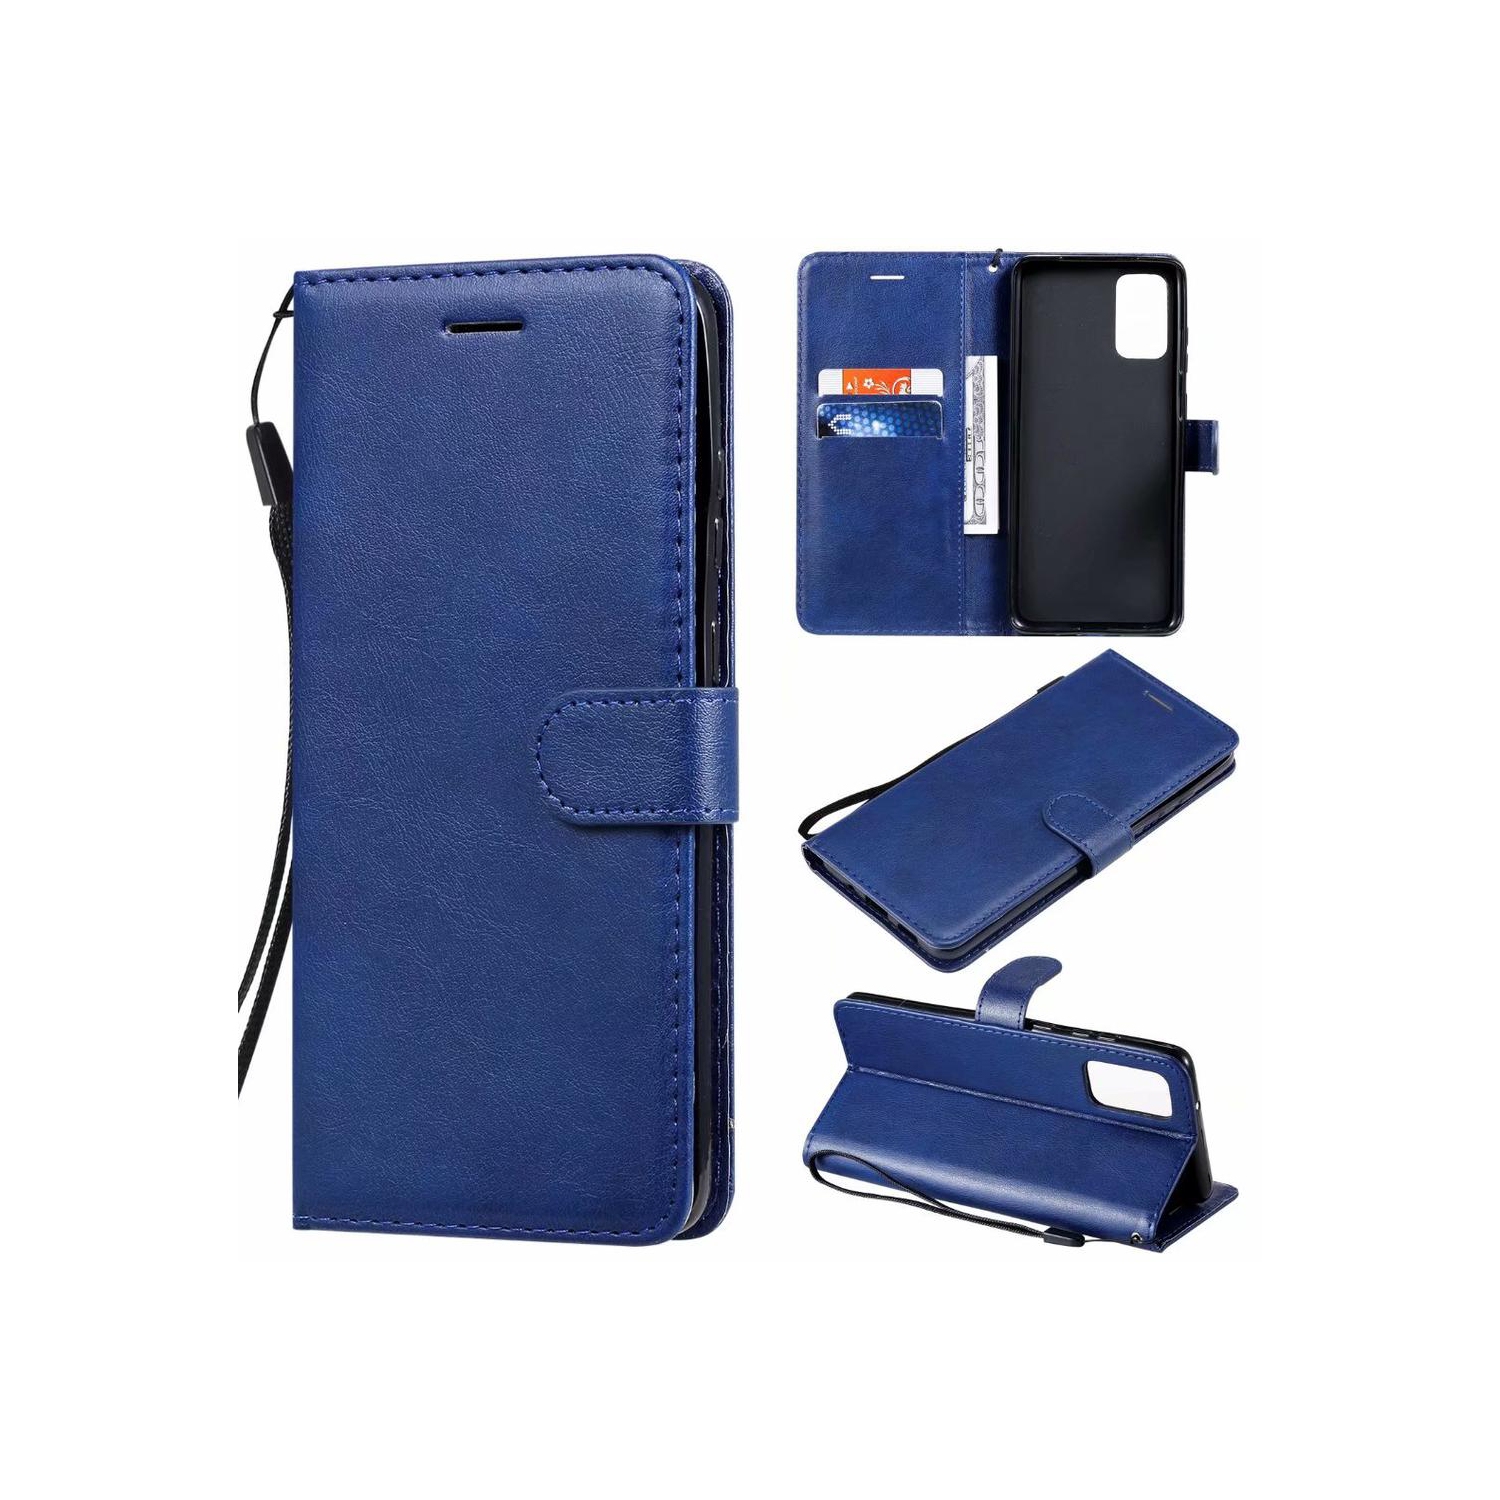 [CS] Samsung Galaxy A32 5G Case, Magnetic Leather Folio Wallet Flip Case Cover with Card Slot, Navy